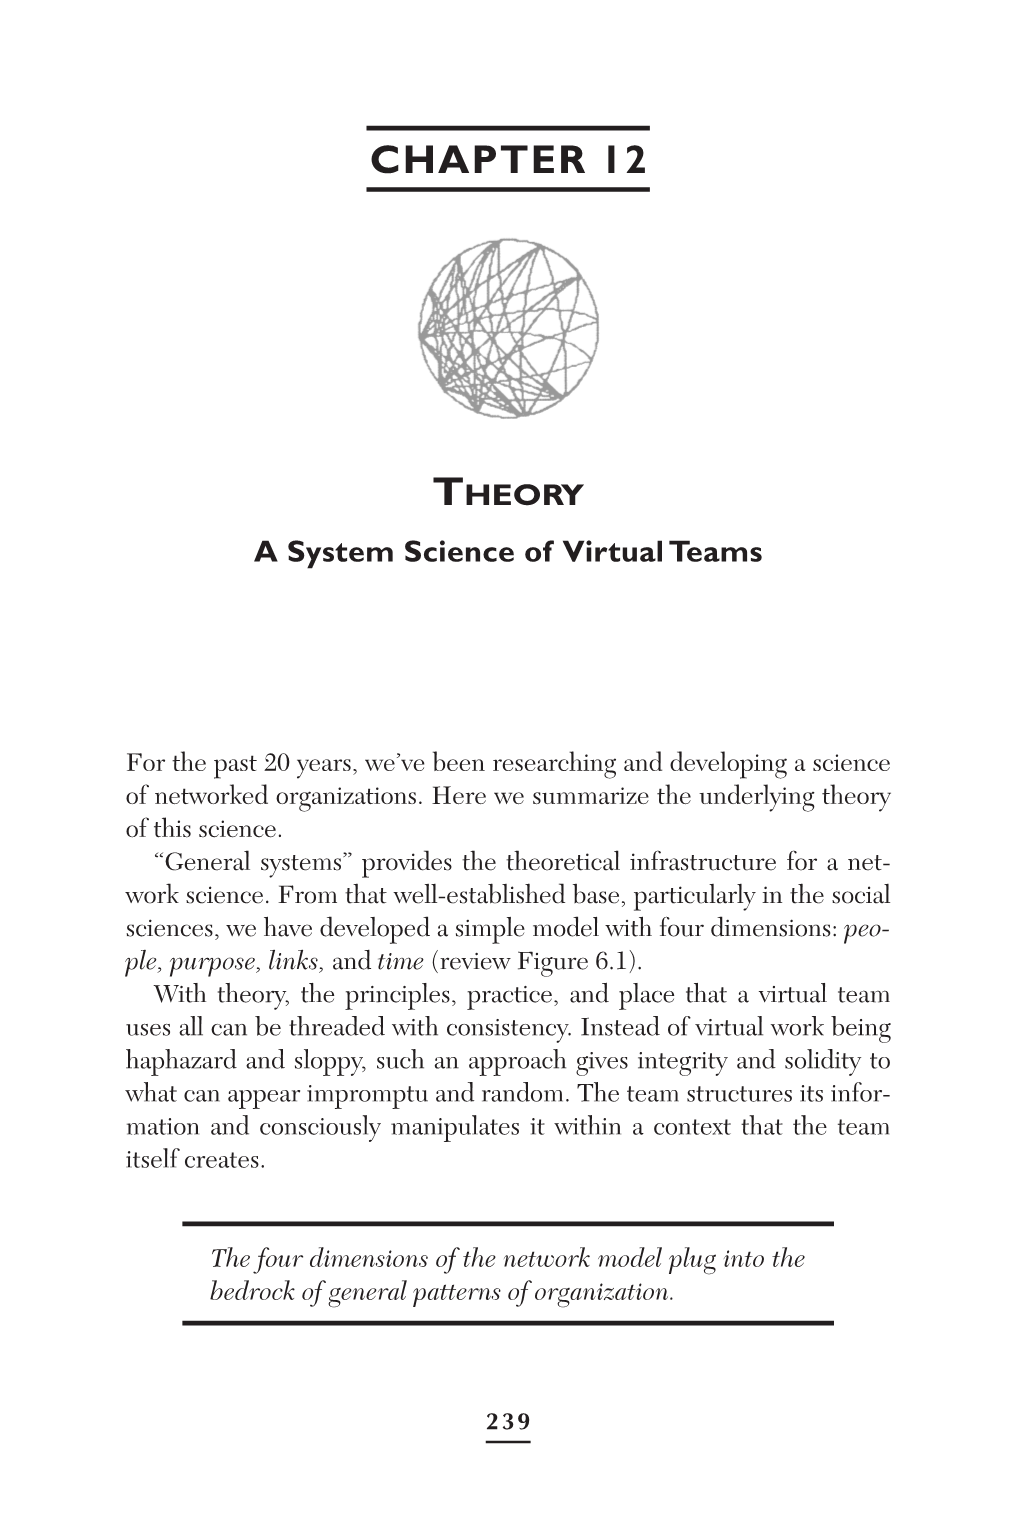 See Chapter 12, Theory: a Systems Science of Virtual Teams